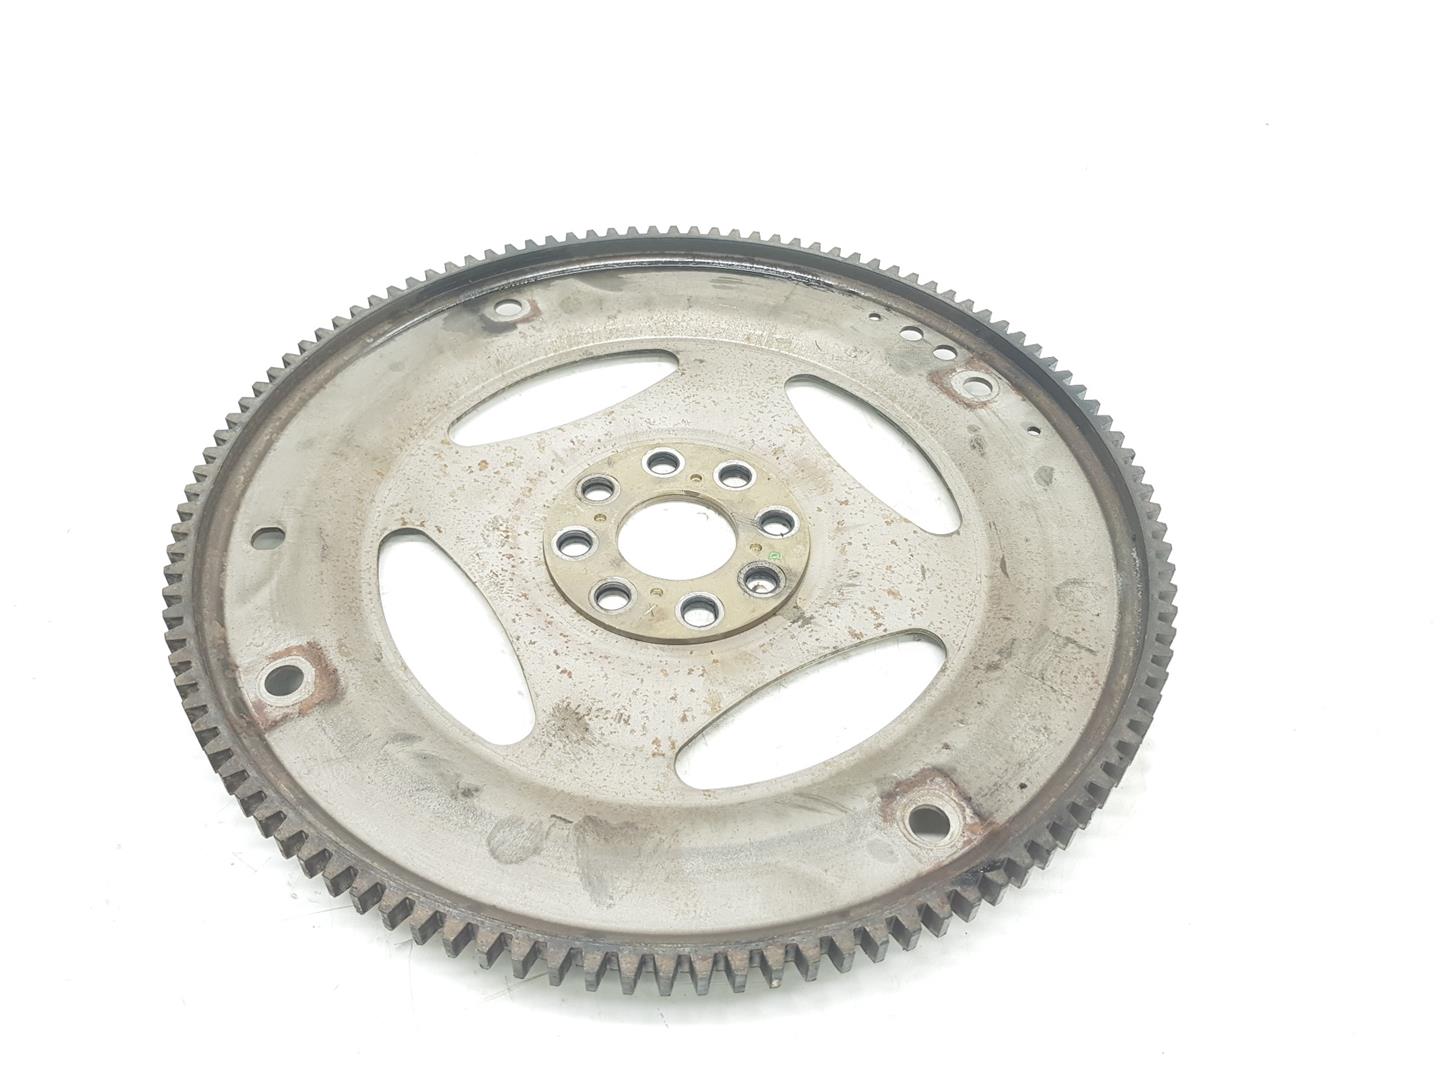 LAND ROVER Discovery 3 generation (2004-2009) Flywheel 4602282, 4602282, 1111AA 24238338